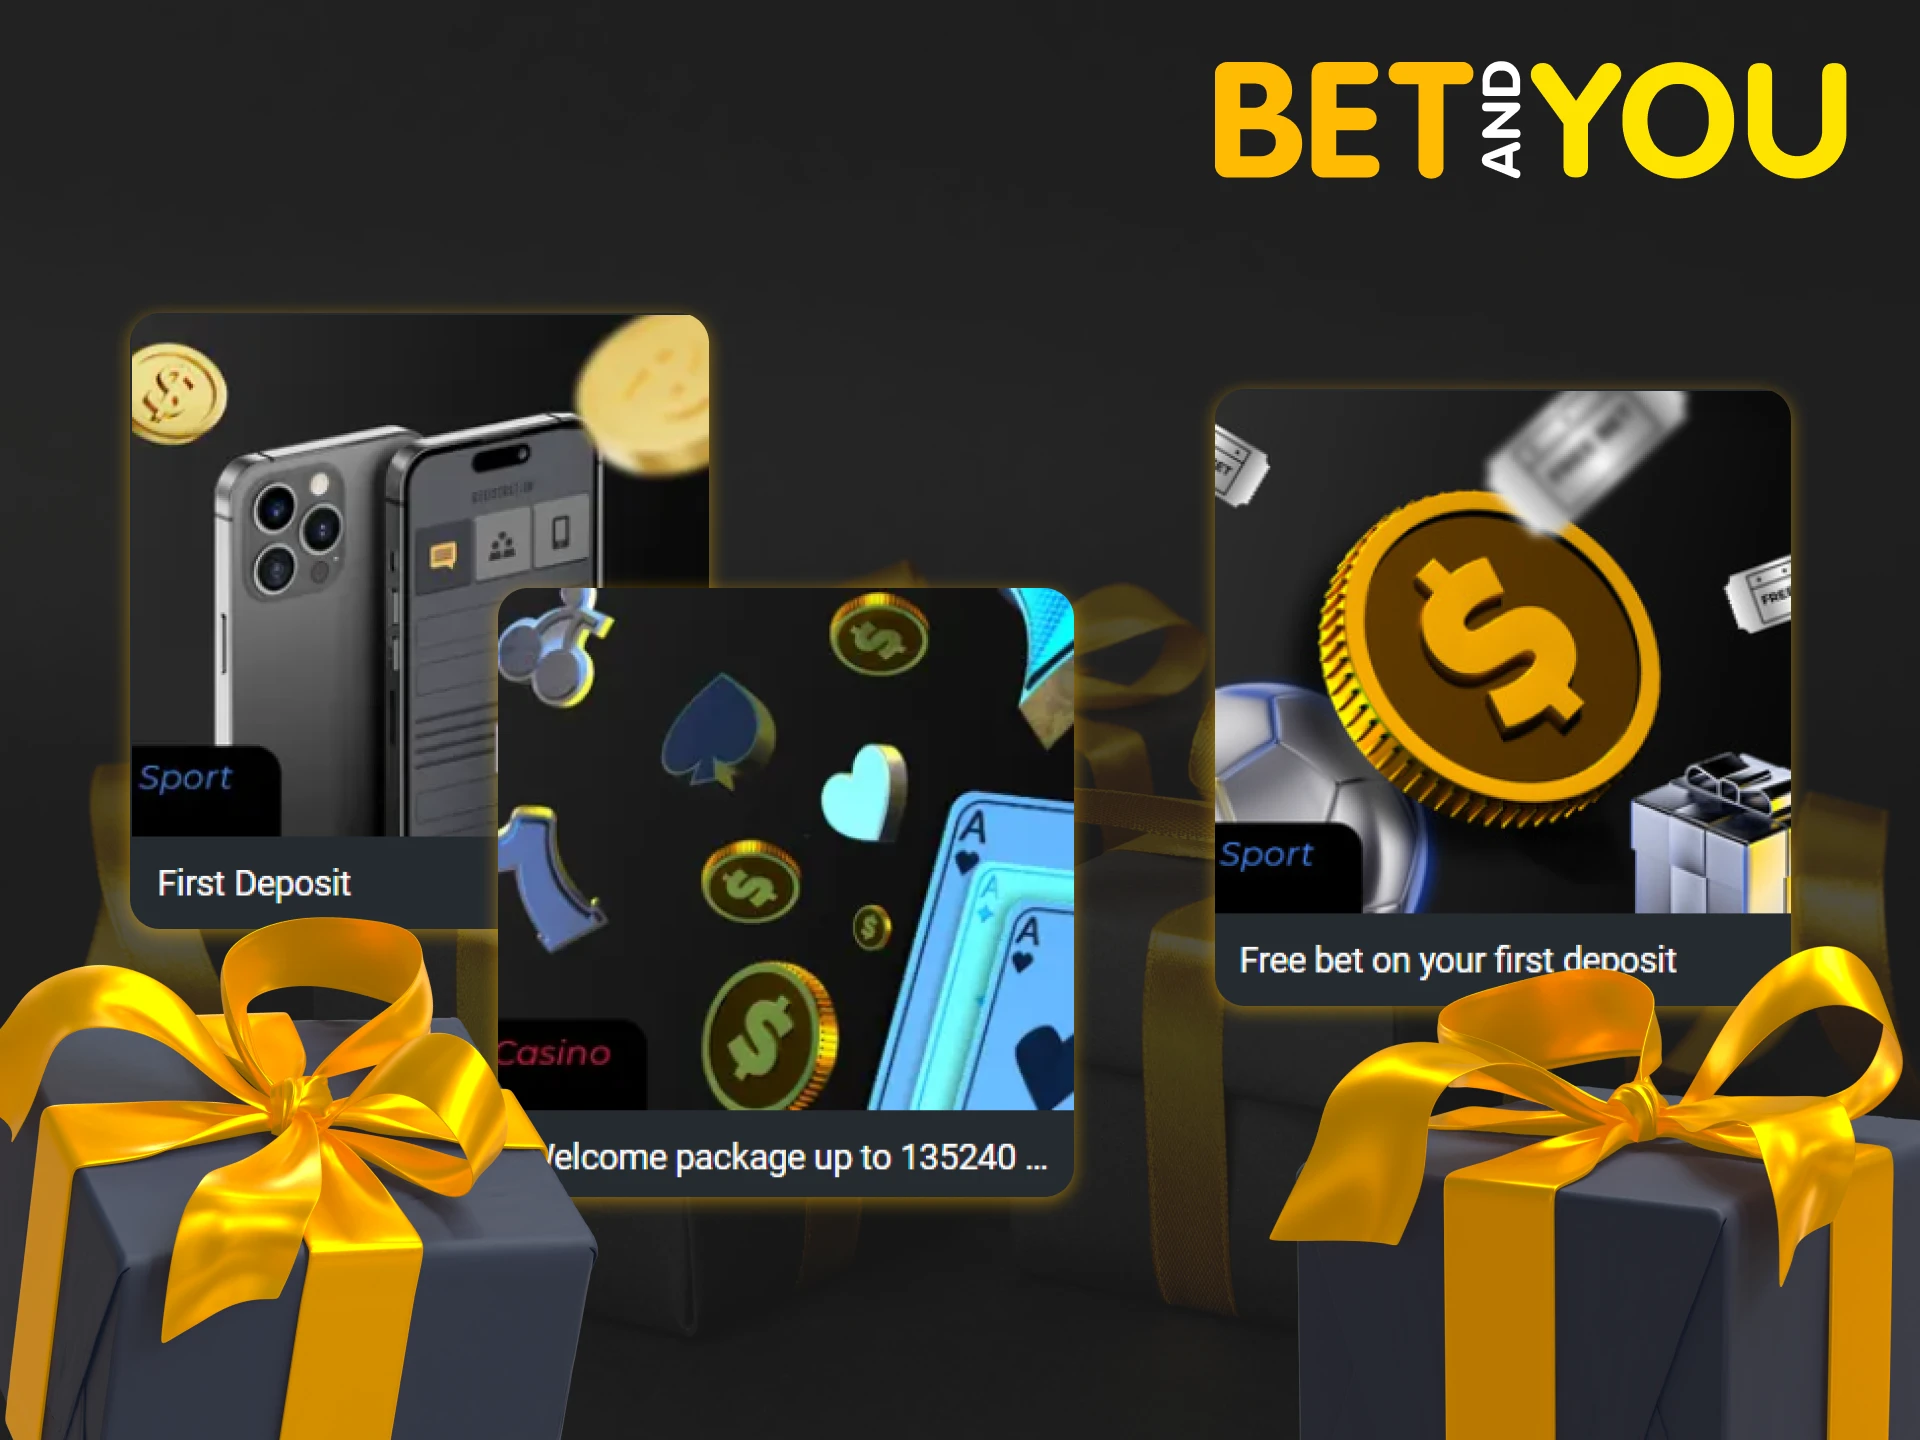 Betandyou offers lucrative sports and casino welcome bonuses.